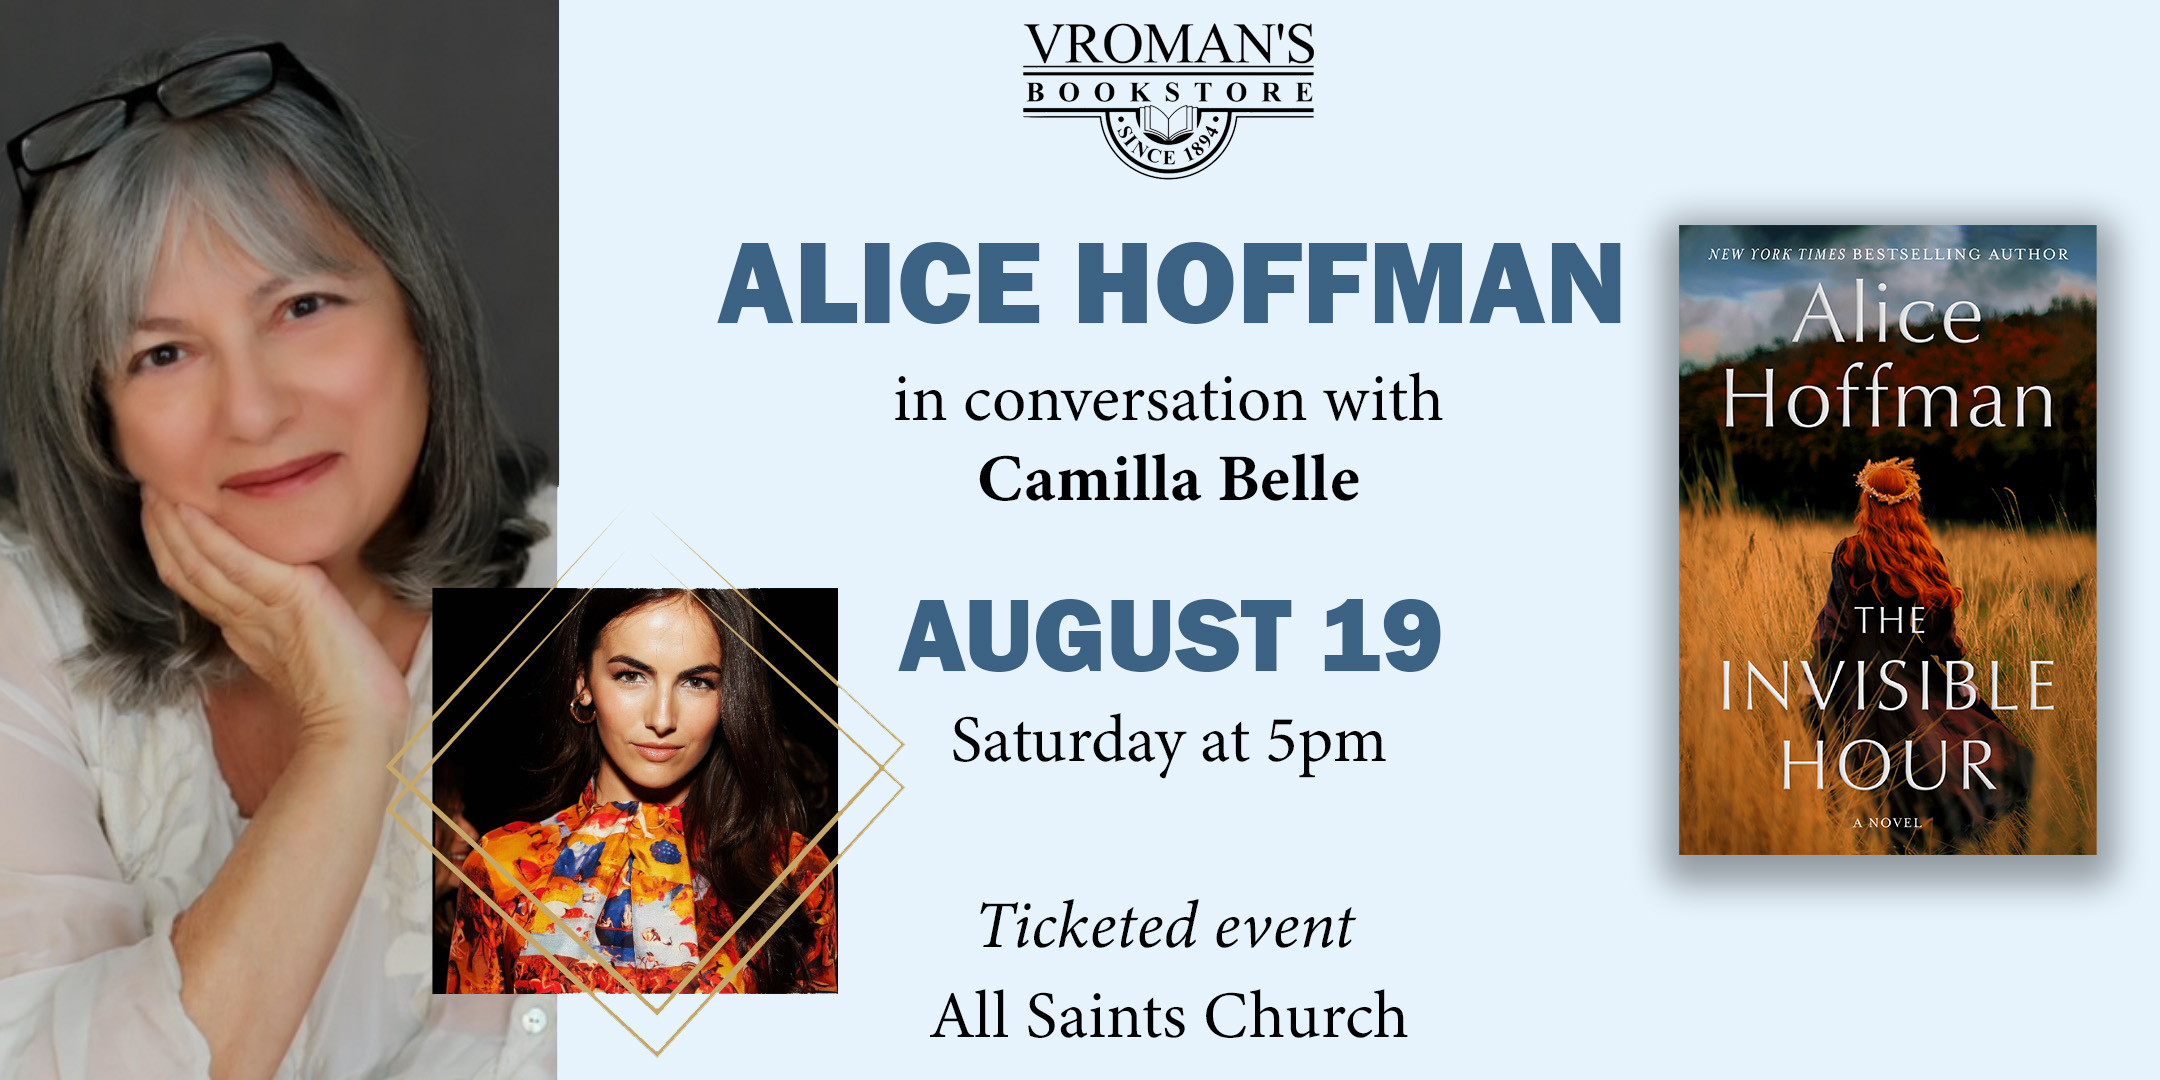 Author Alice Hoffman ticketed event details for August 19th at 5pm